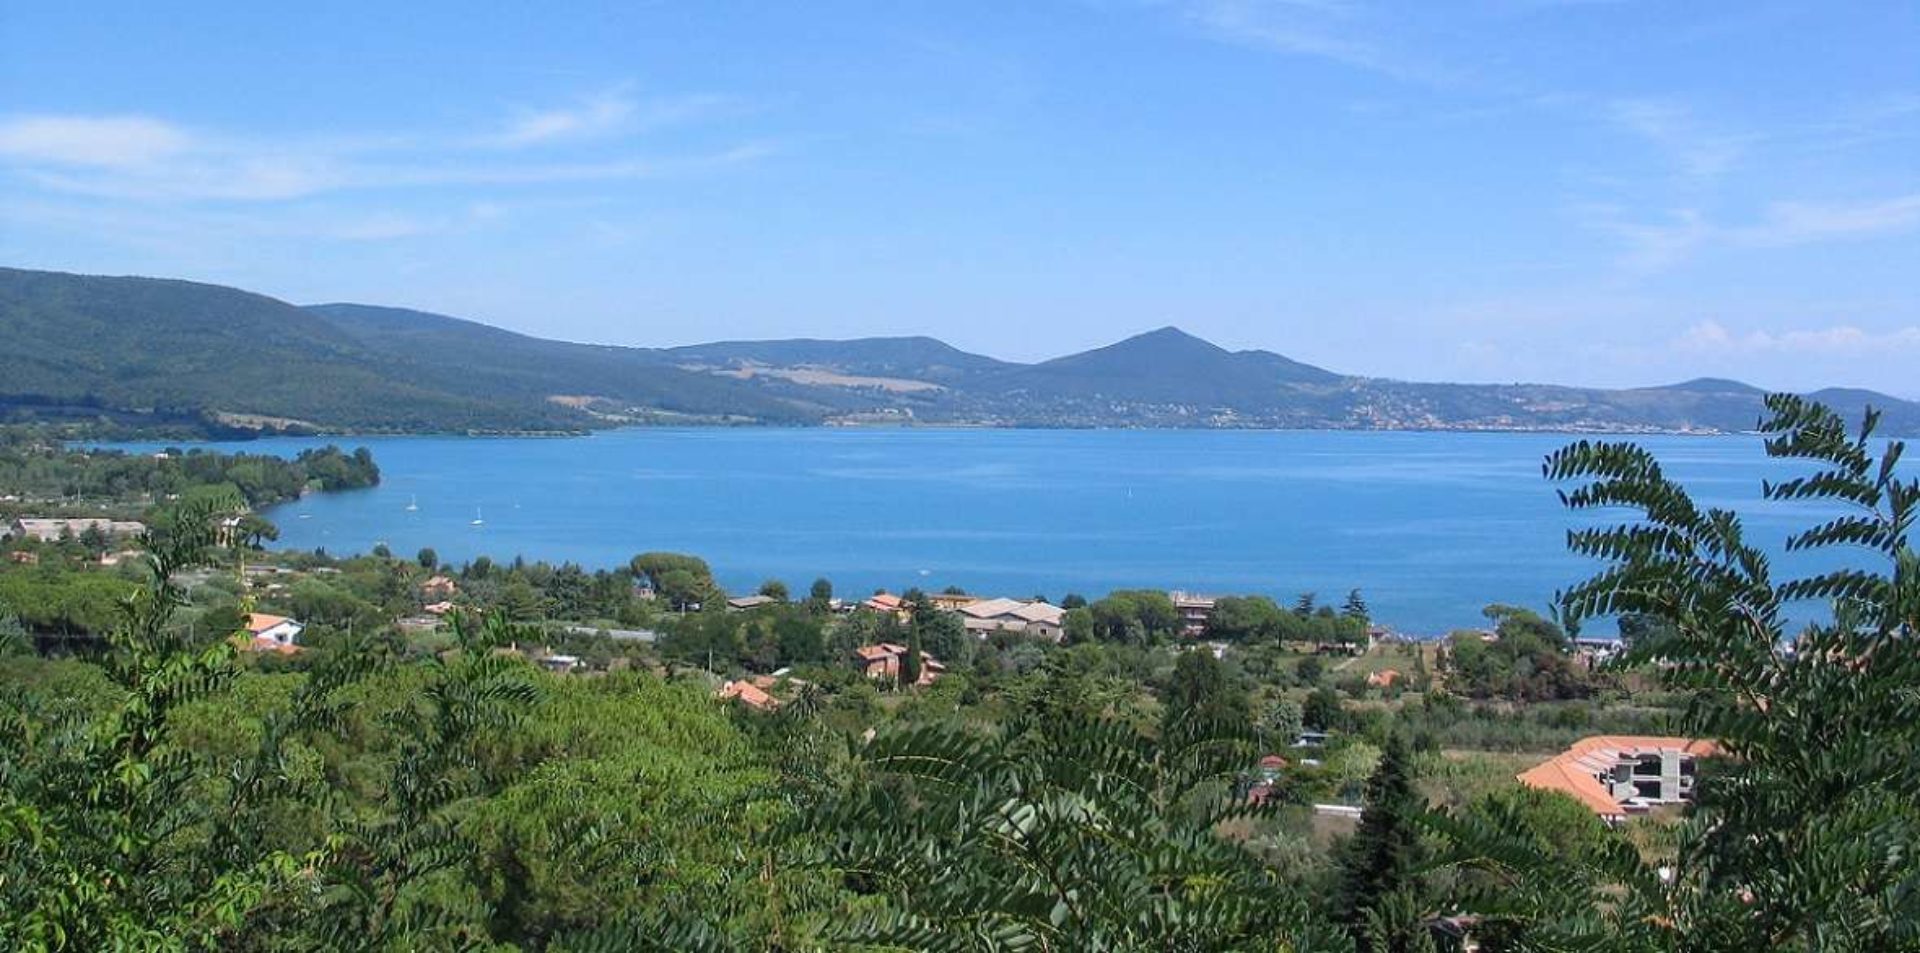 Helicopter Tours Lake Bracciano